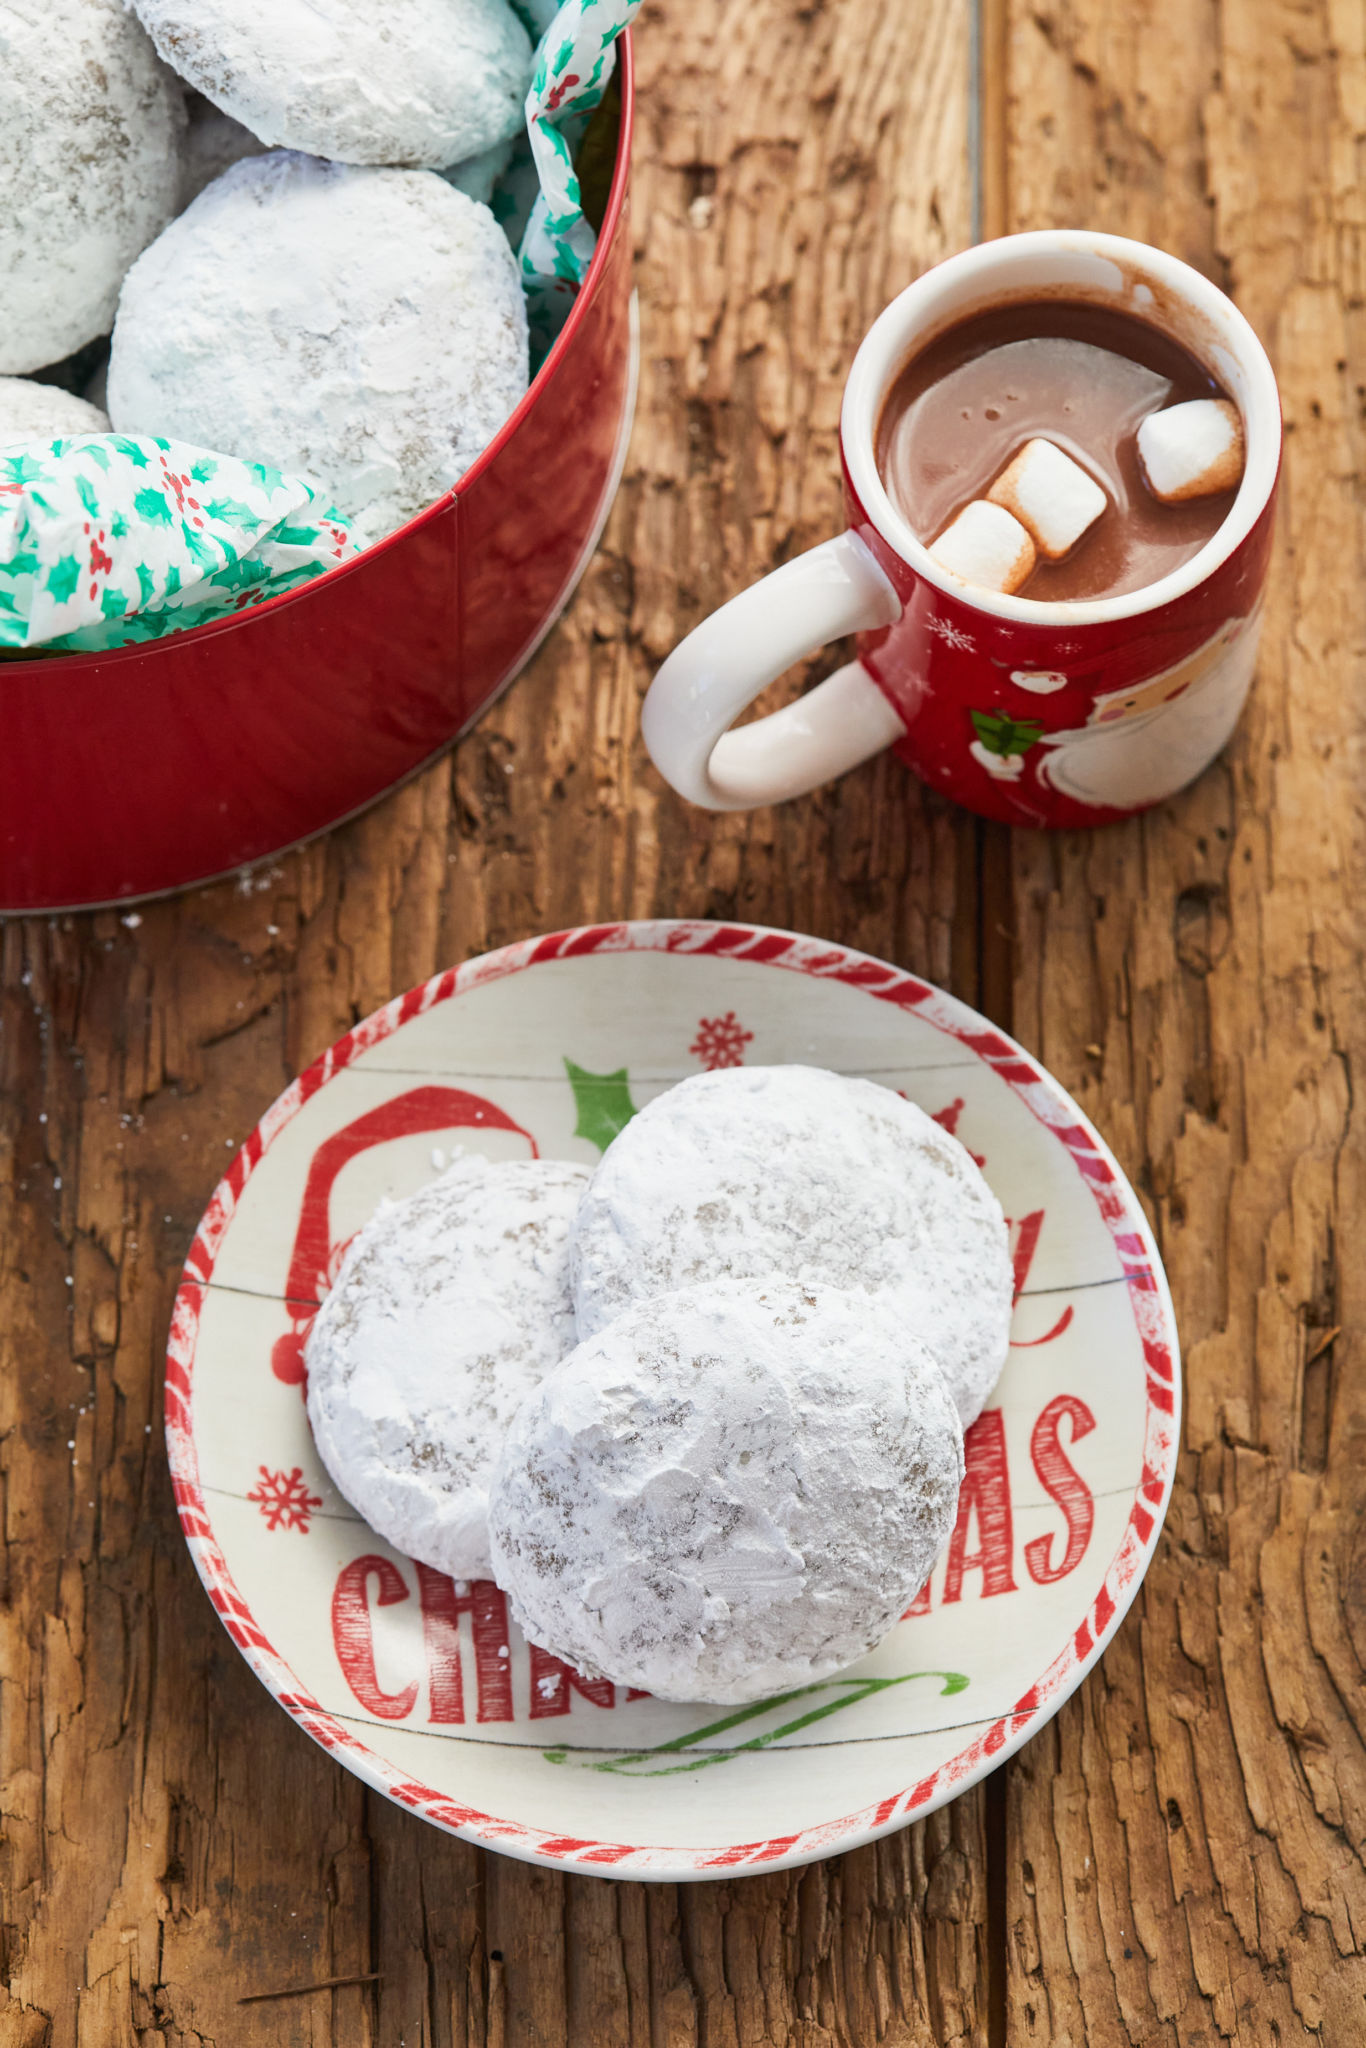 Homemade Spiced Pfeffernusse cookies, coated in powdered sugar, are served on a Christmas plate next to a bowl full of cookies and a Santa mug filled with hot chocolate with marshmallows. 